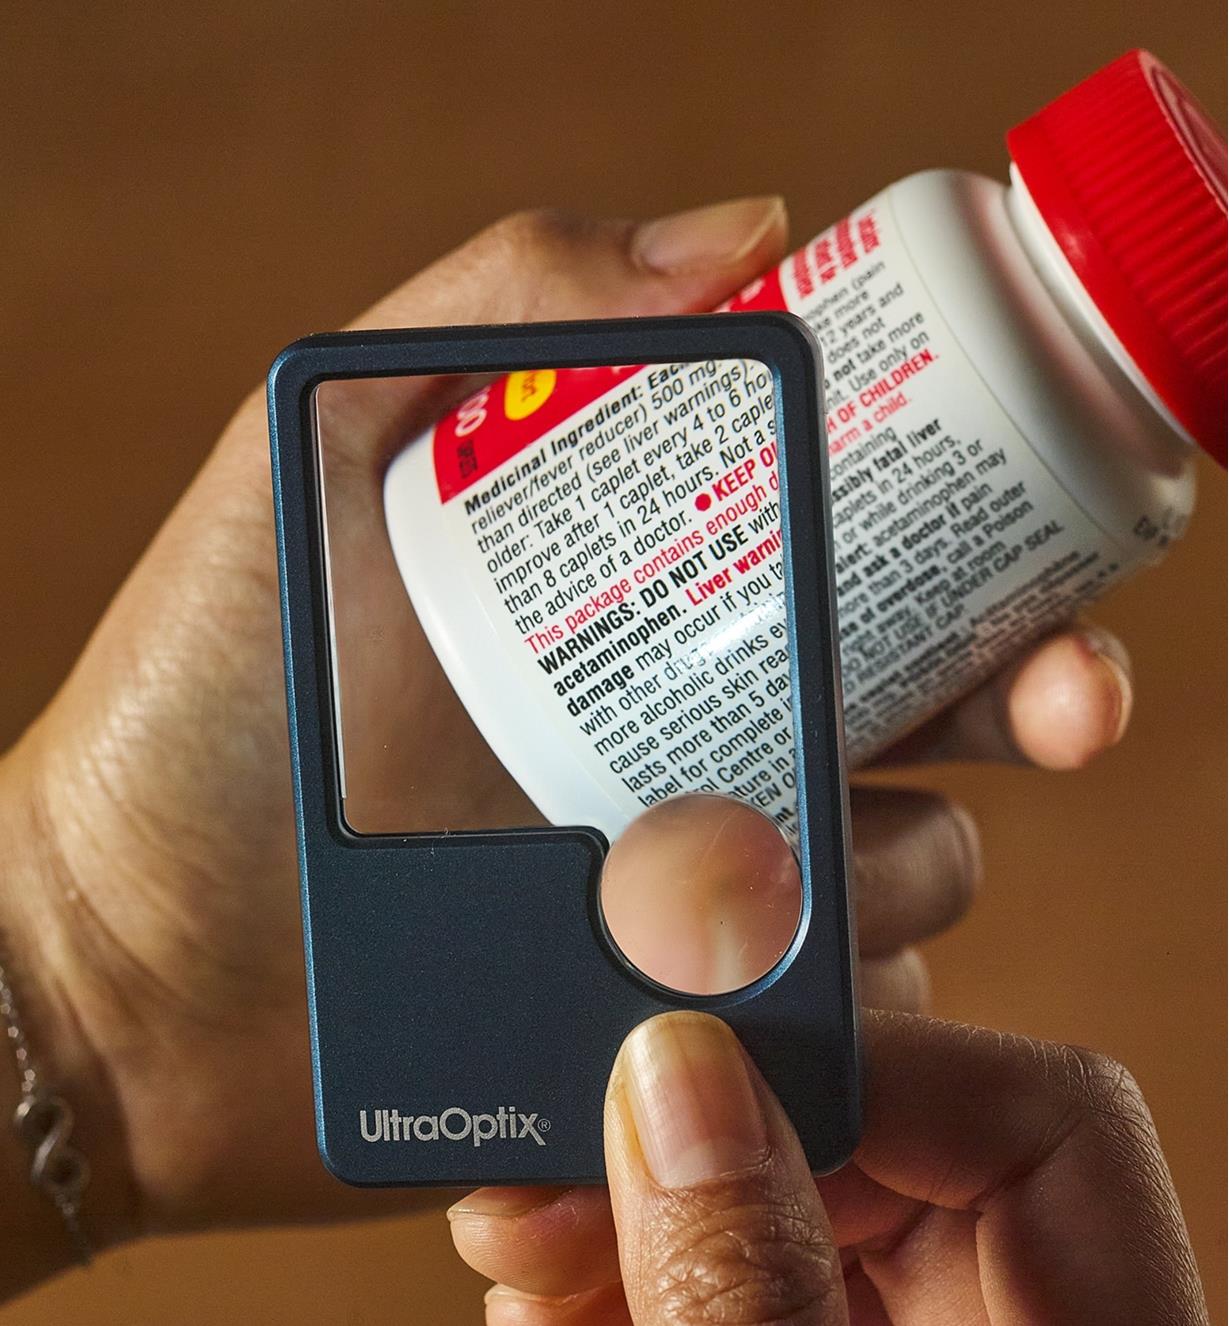 Using an LED pocket magnifier to read fine print on a medicine label